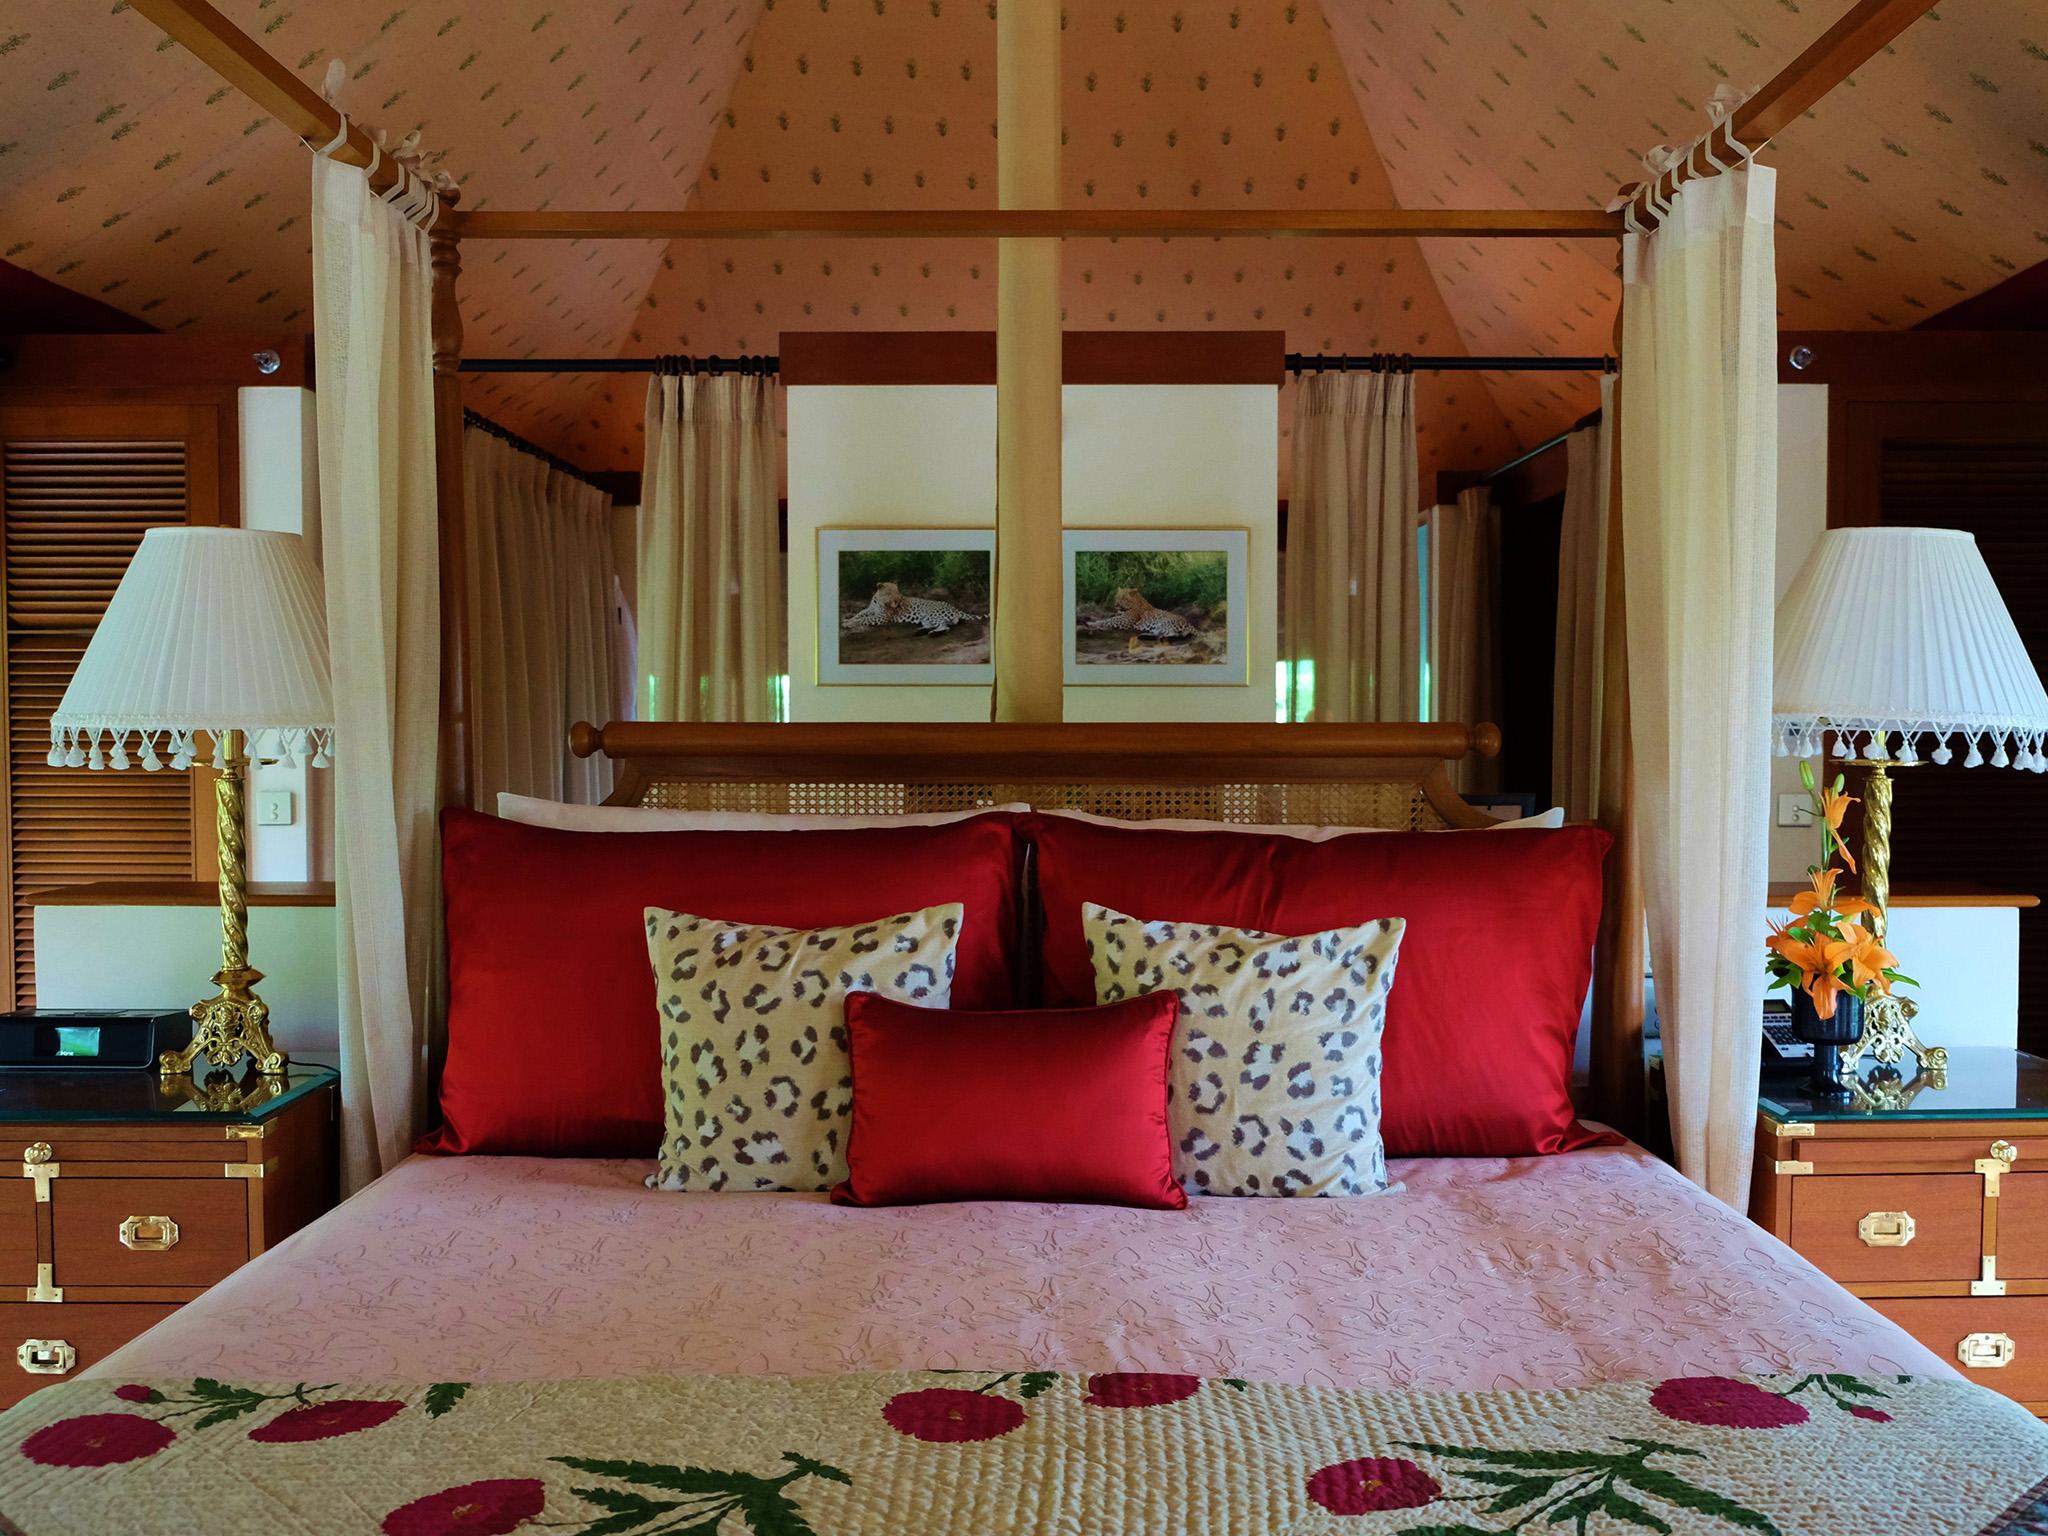 Canopy beds and rooms ensconced in fabric are a big autumn trend inspired by luxury tents